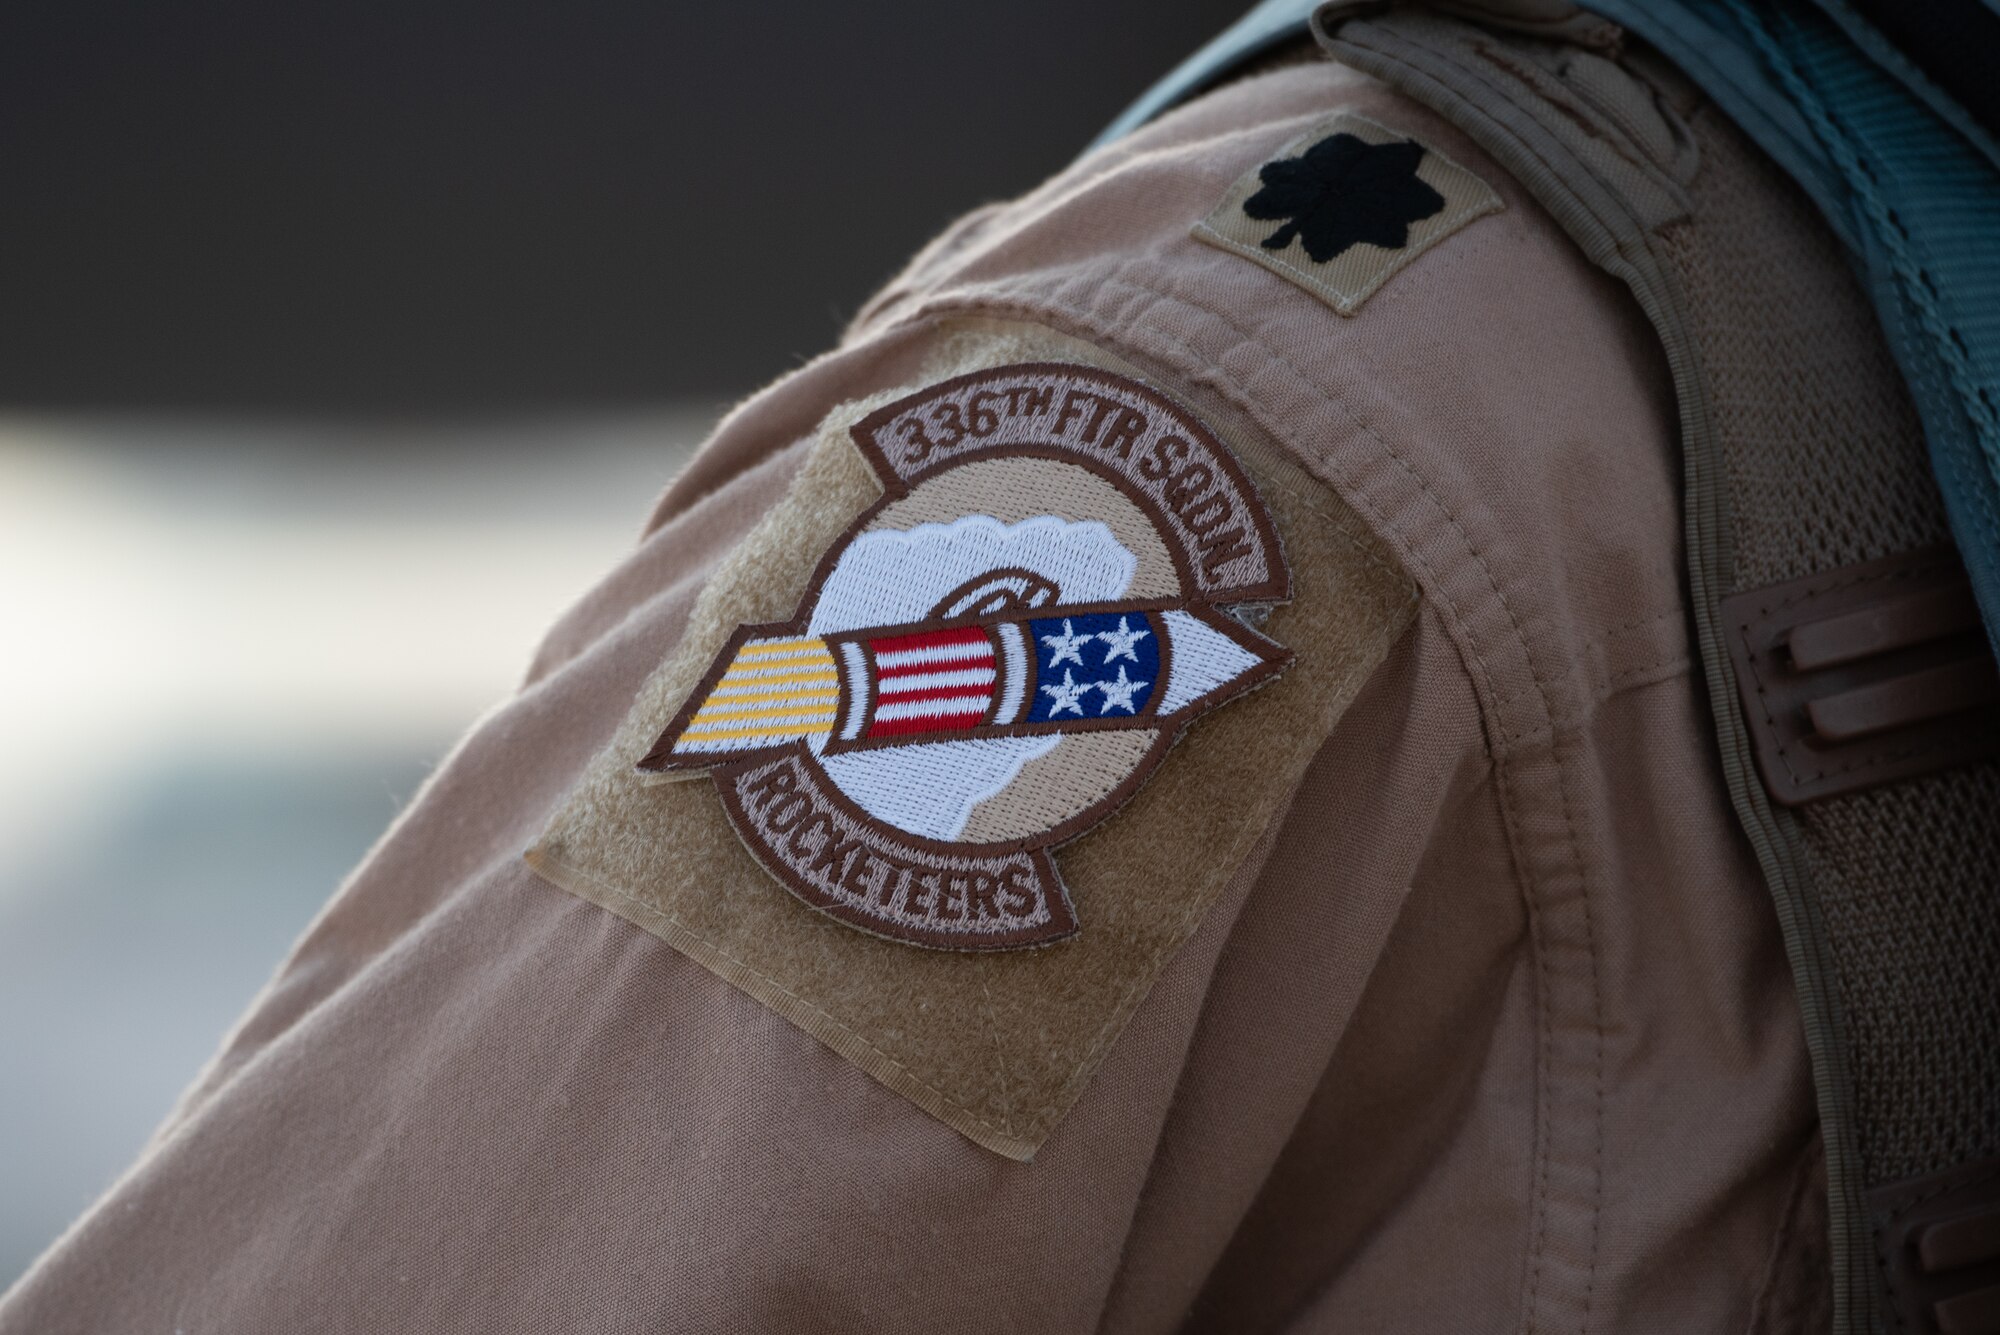 A 336th Fighter Squadron patch is displayed on an F-15E Strike Eagle pilot, June 13, 2019, at Al Dhafra Air Base, United Arab Emirates. The 336th FS deployed from Seymour Johnson Air Force Base, North Carolina, to join Team ADAB’s diverse inventory of air power. (U.S. Air Force photo by Staff Sgt. Chris Thornbury)